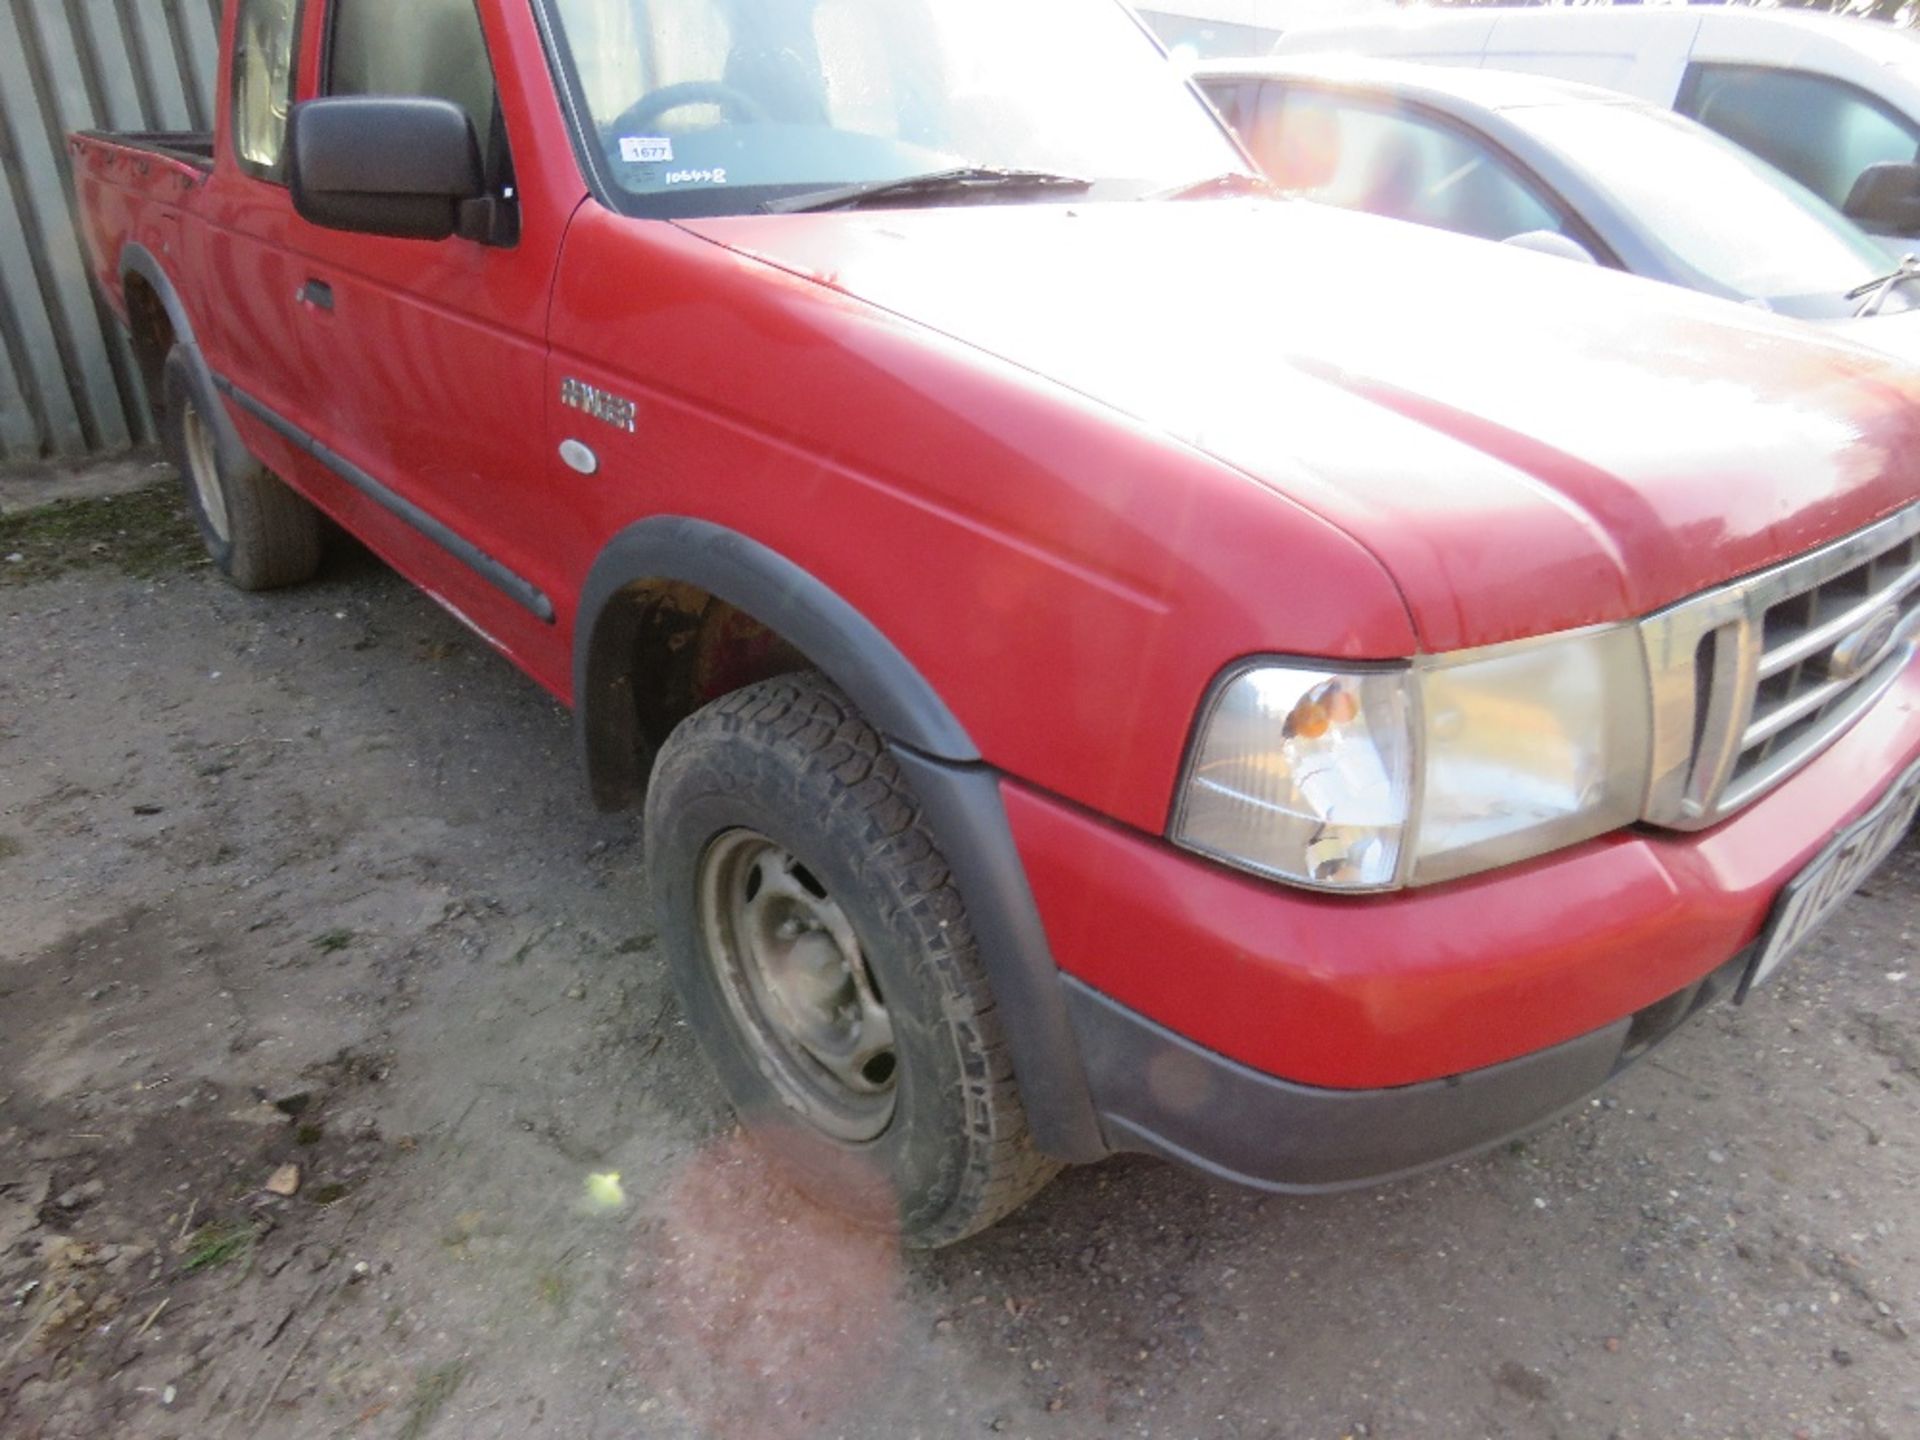 FORD RANGER KING CAB PICKUP TRUCK REG:AY05 WPR. MANUAL GEARBOX. 106,448 REC MILES. DIRECT FROM LOCAL - Image 11 of 11